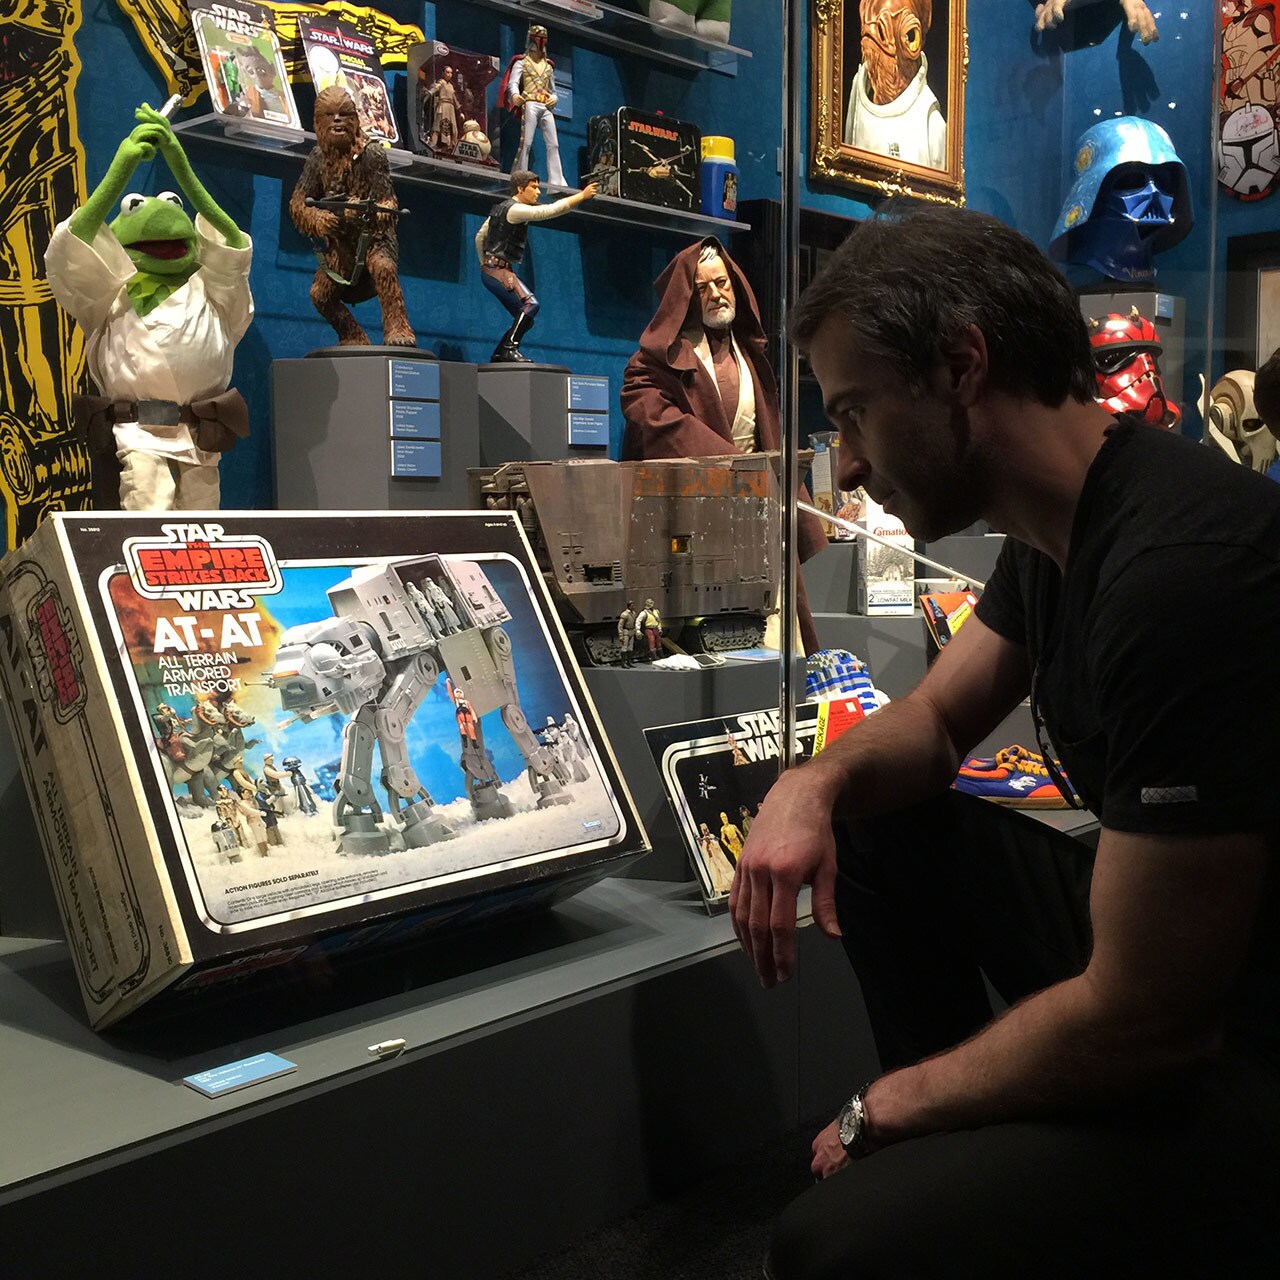 Television producer Jordan Schlansky looks at an AT-AT toy in its original packaging which is part of a display of Star Wars toys and memorabilia.